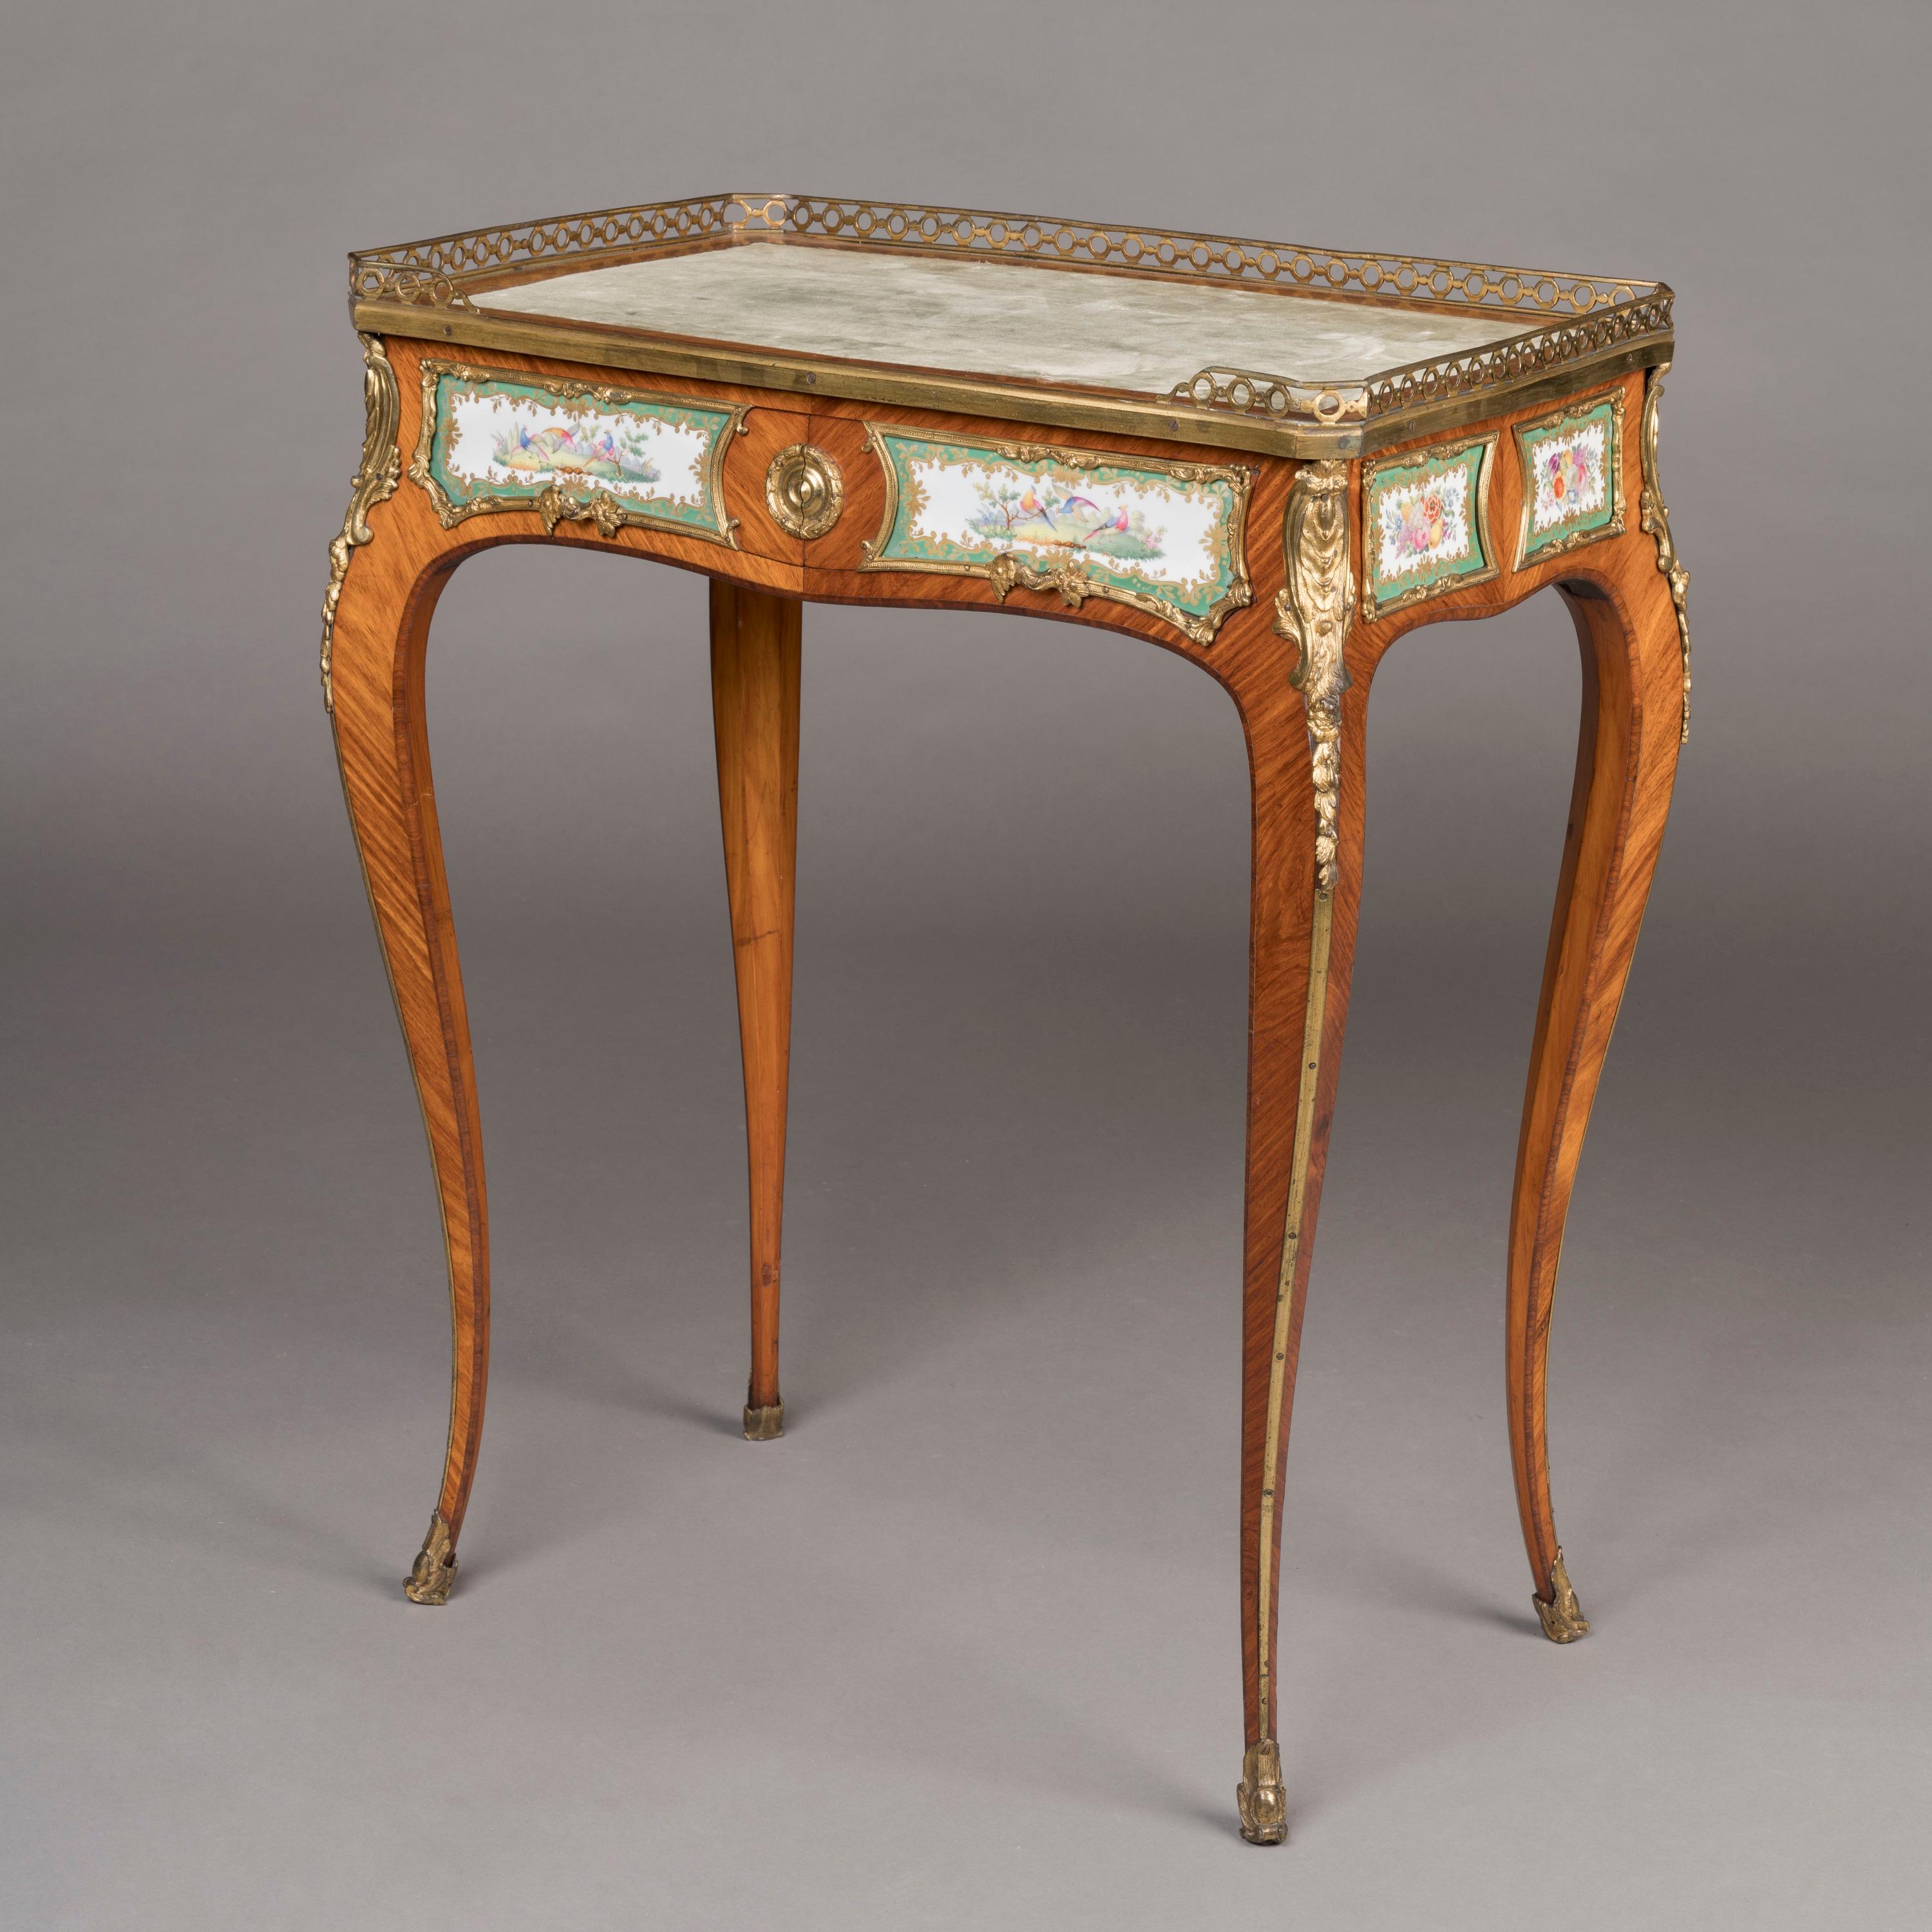 A Porcelain-Mounted Occasional Table in the Transitional Manner
Attributed to Edward Holmes Baldock

Constructed from kingwood and tulipwood, with ormolu mounts in the Louis XV/XVI transitional style, supported on cabriole lefs with sabot feet, the